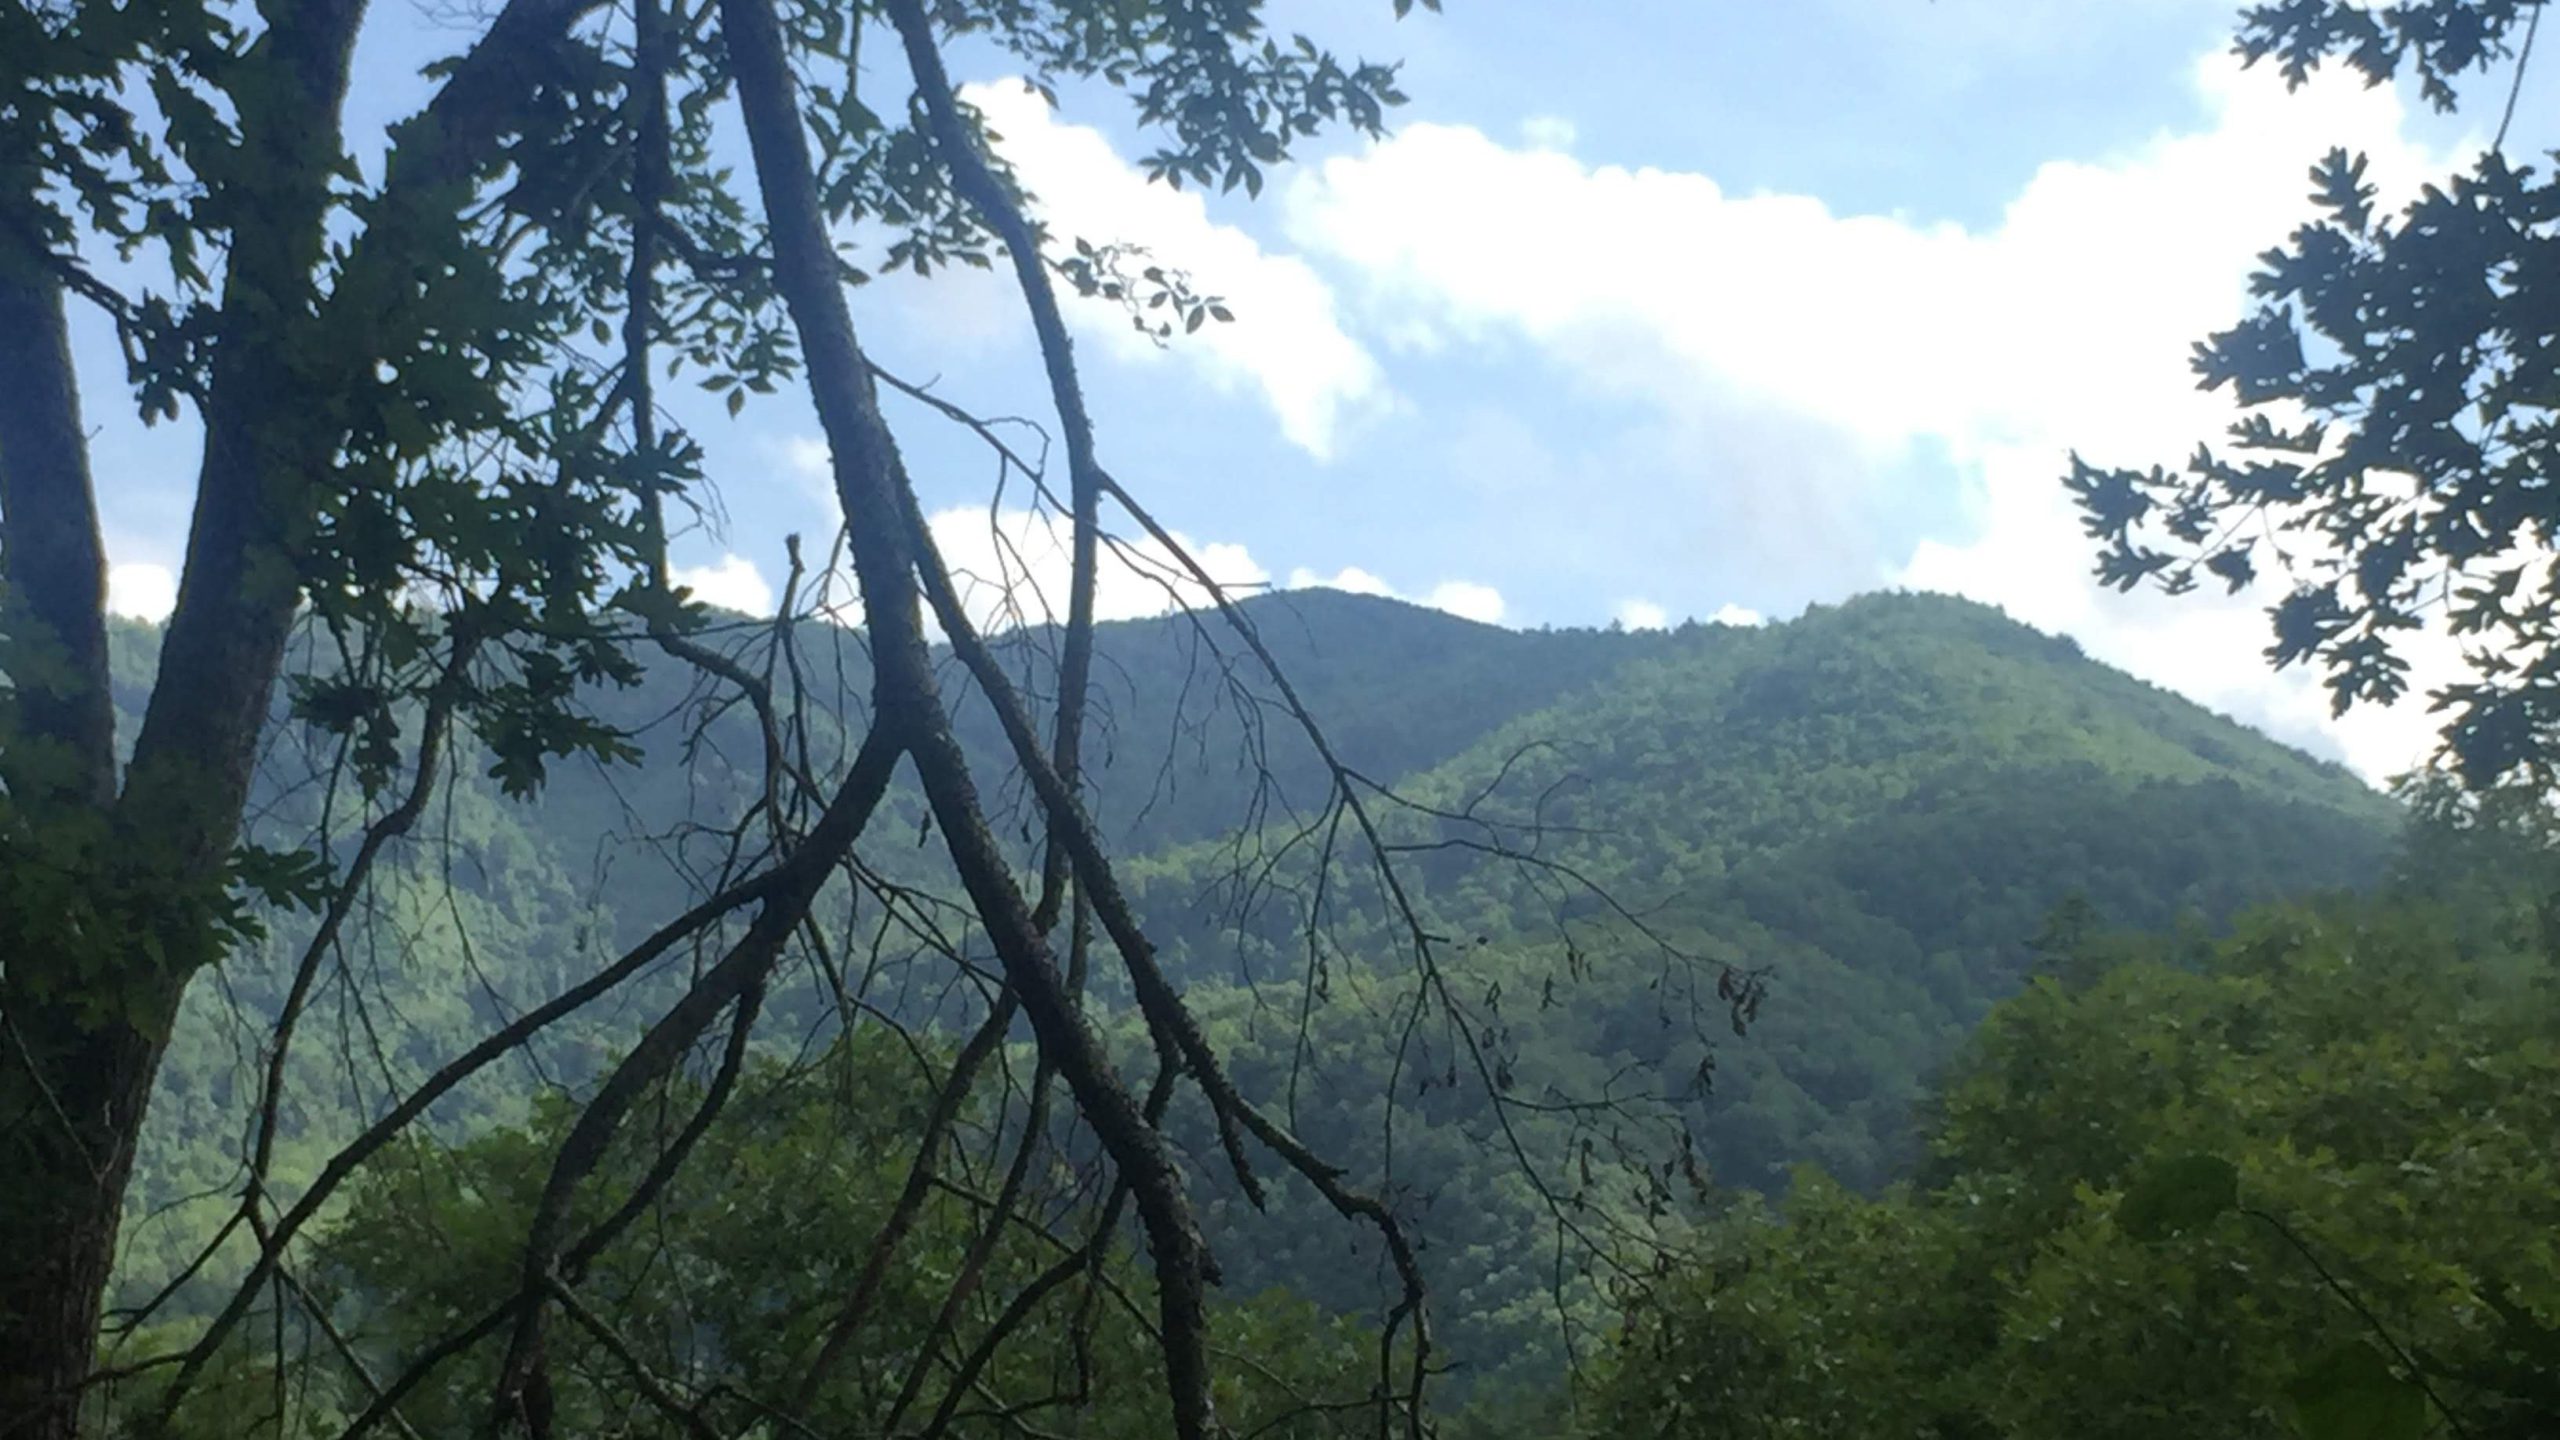 A view of vibrant green forested mountains.